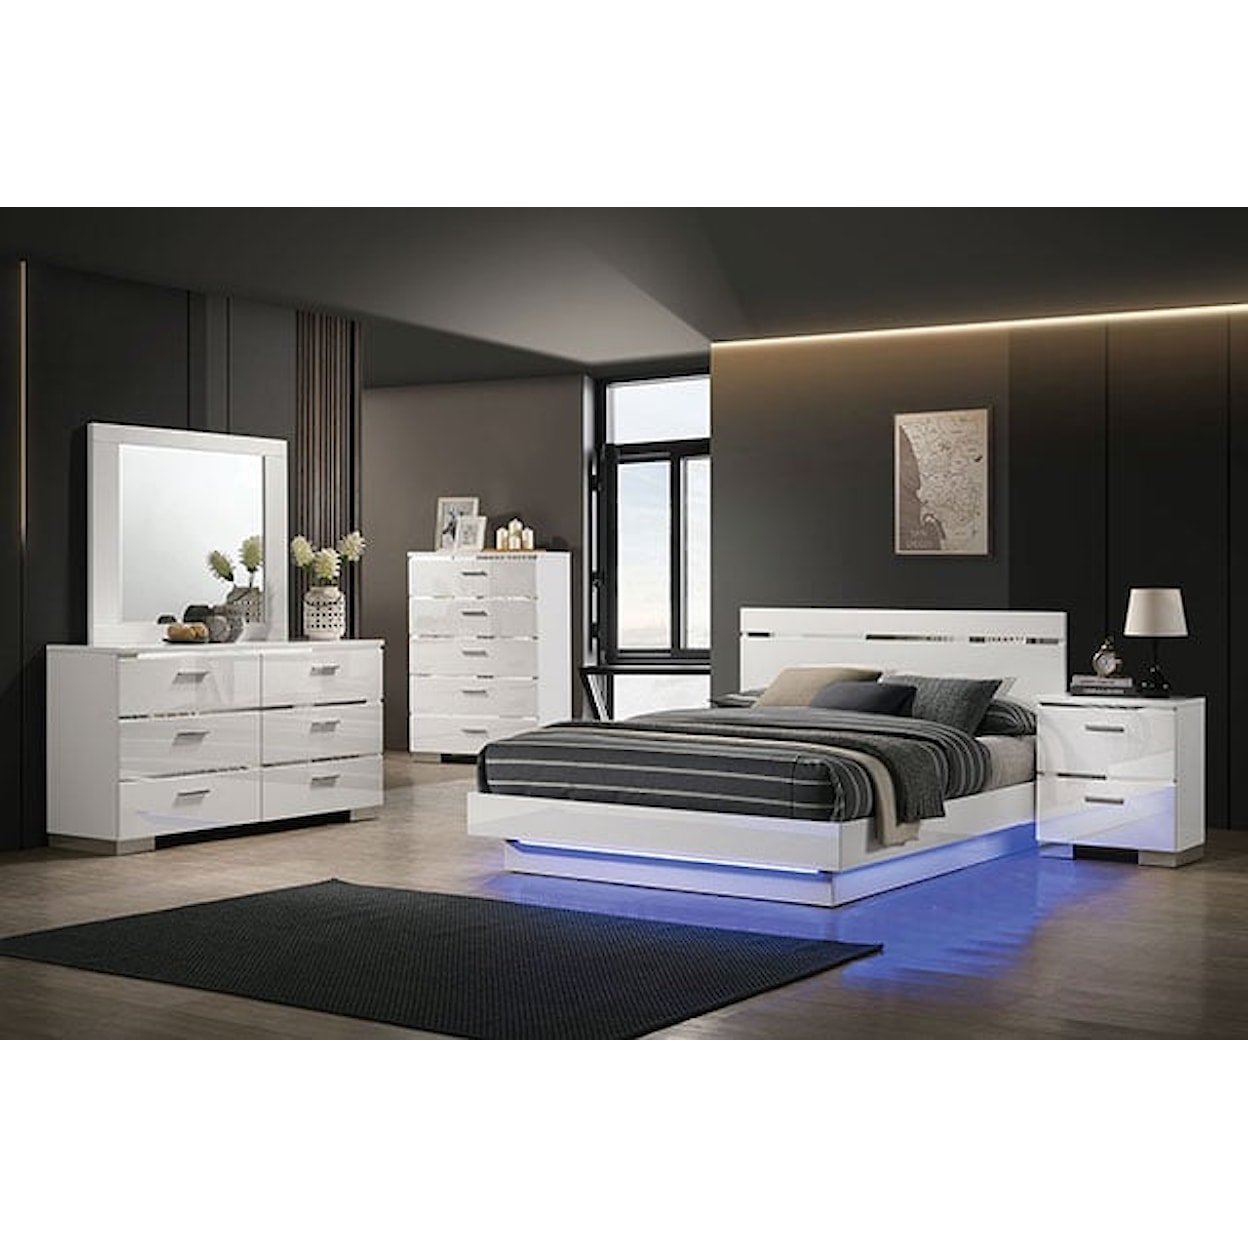 Furniture of America Erlach King Bed with LED Lighting Lining